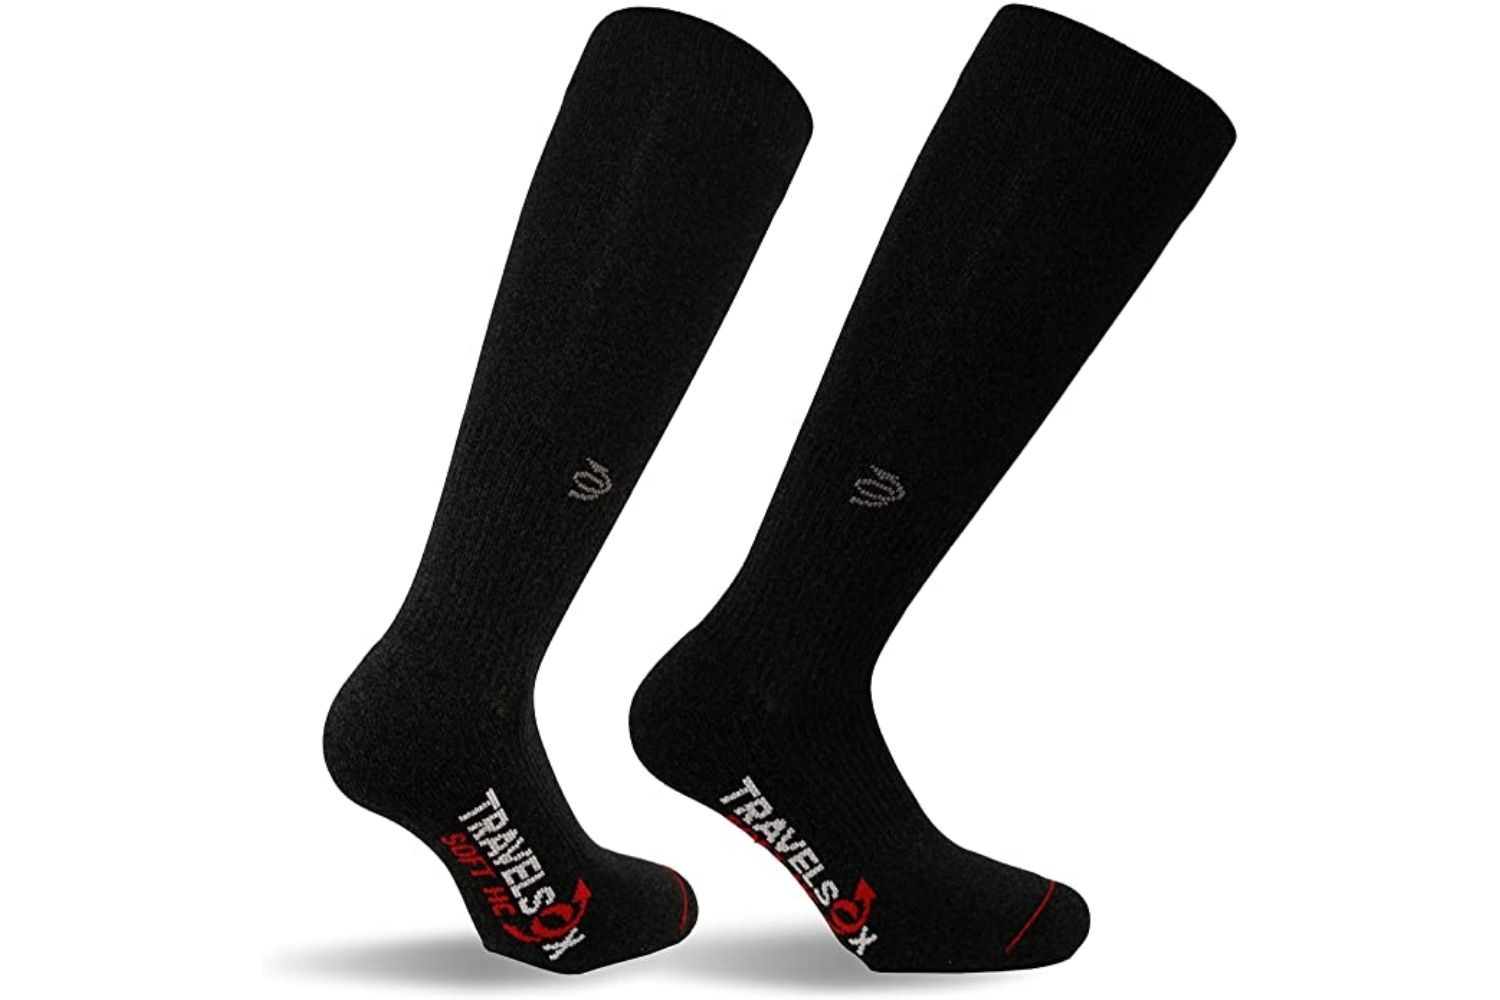 The Best Travel Gifts Option: Travelsox Adult Compression Socks